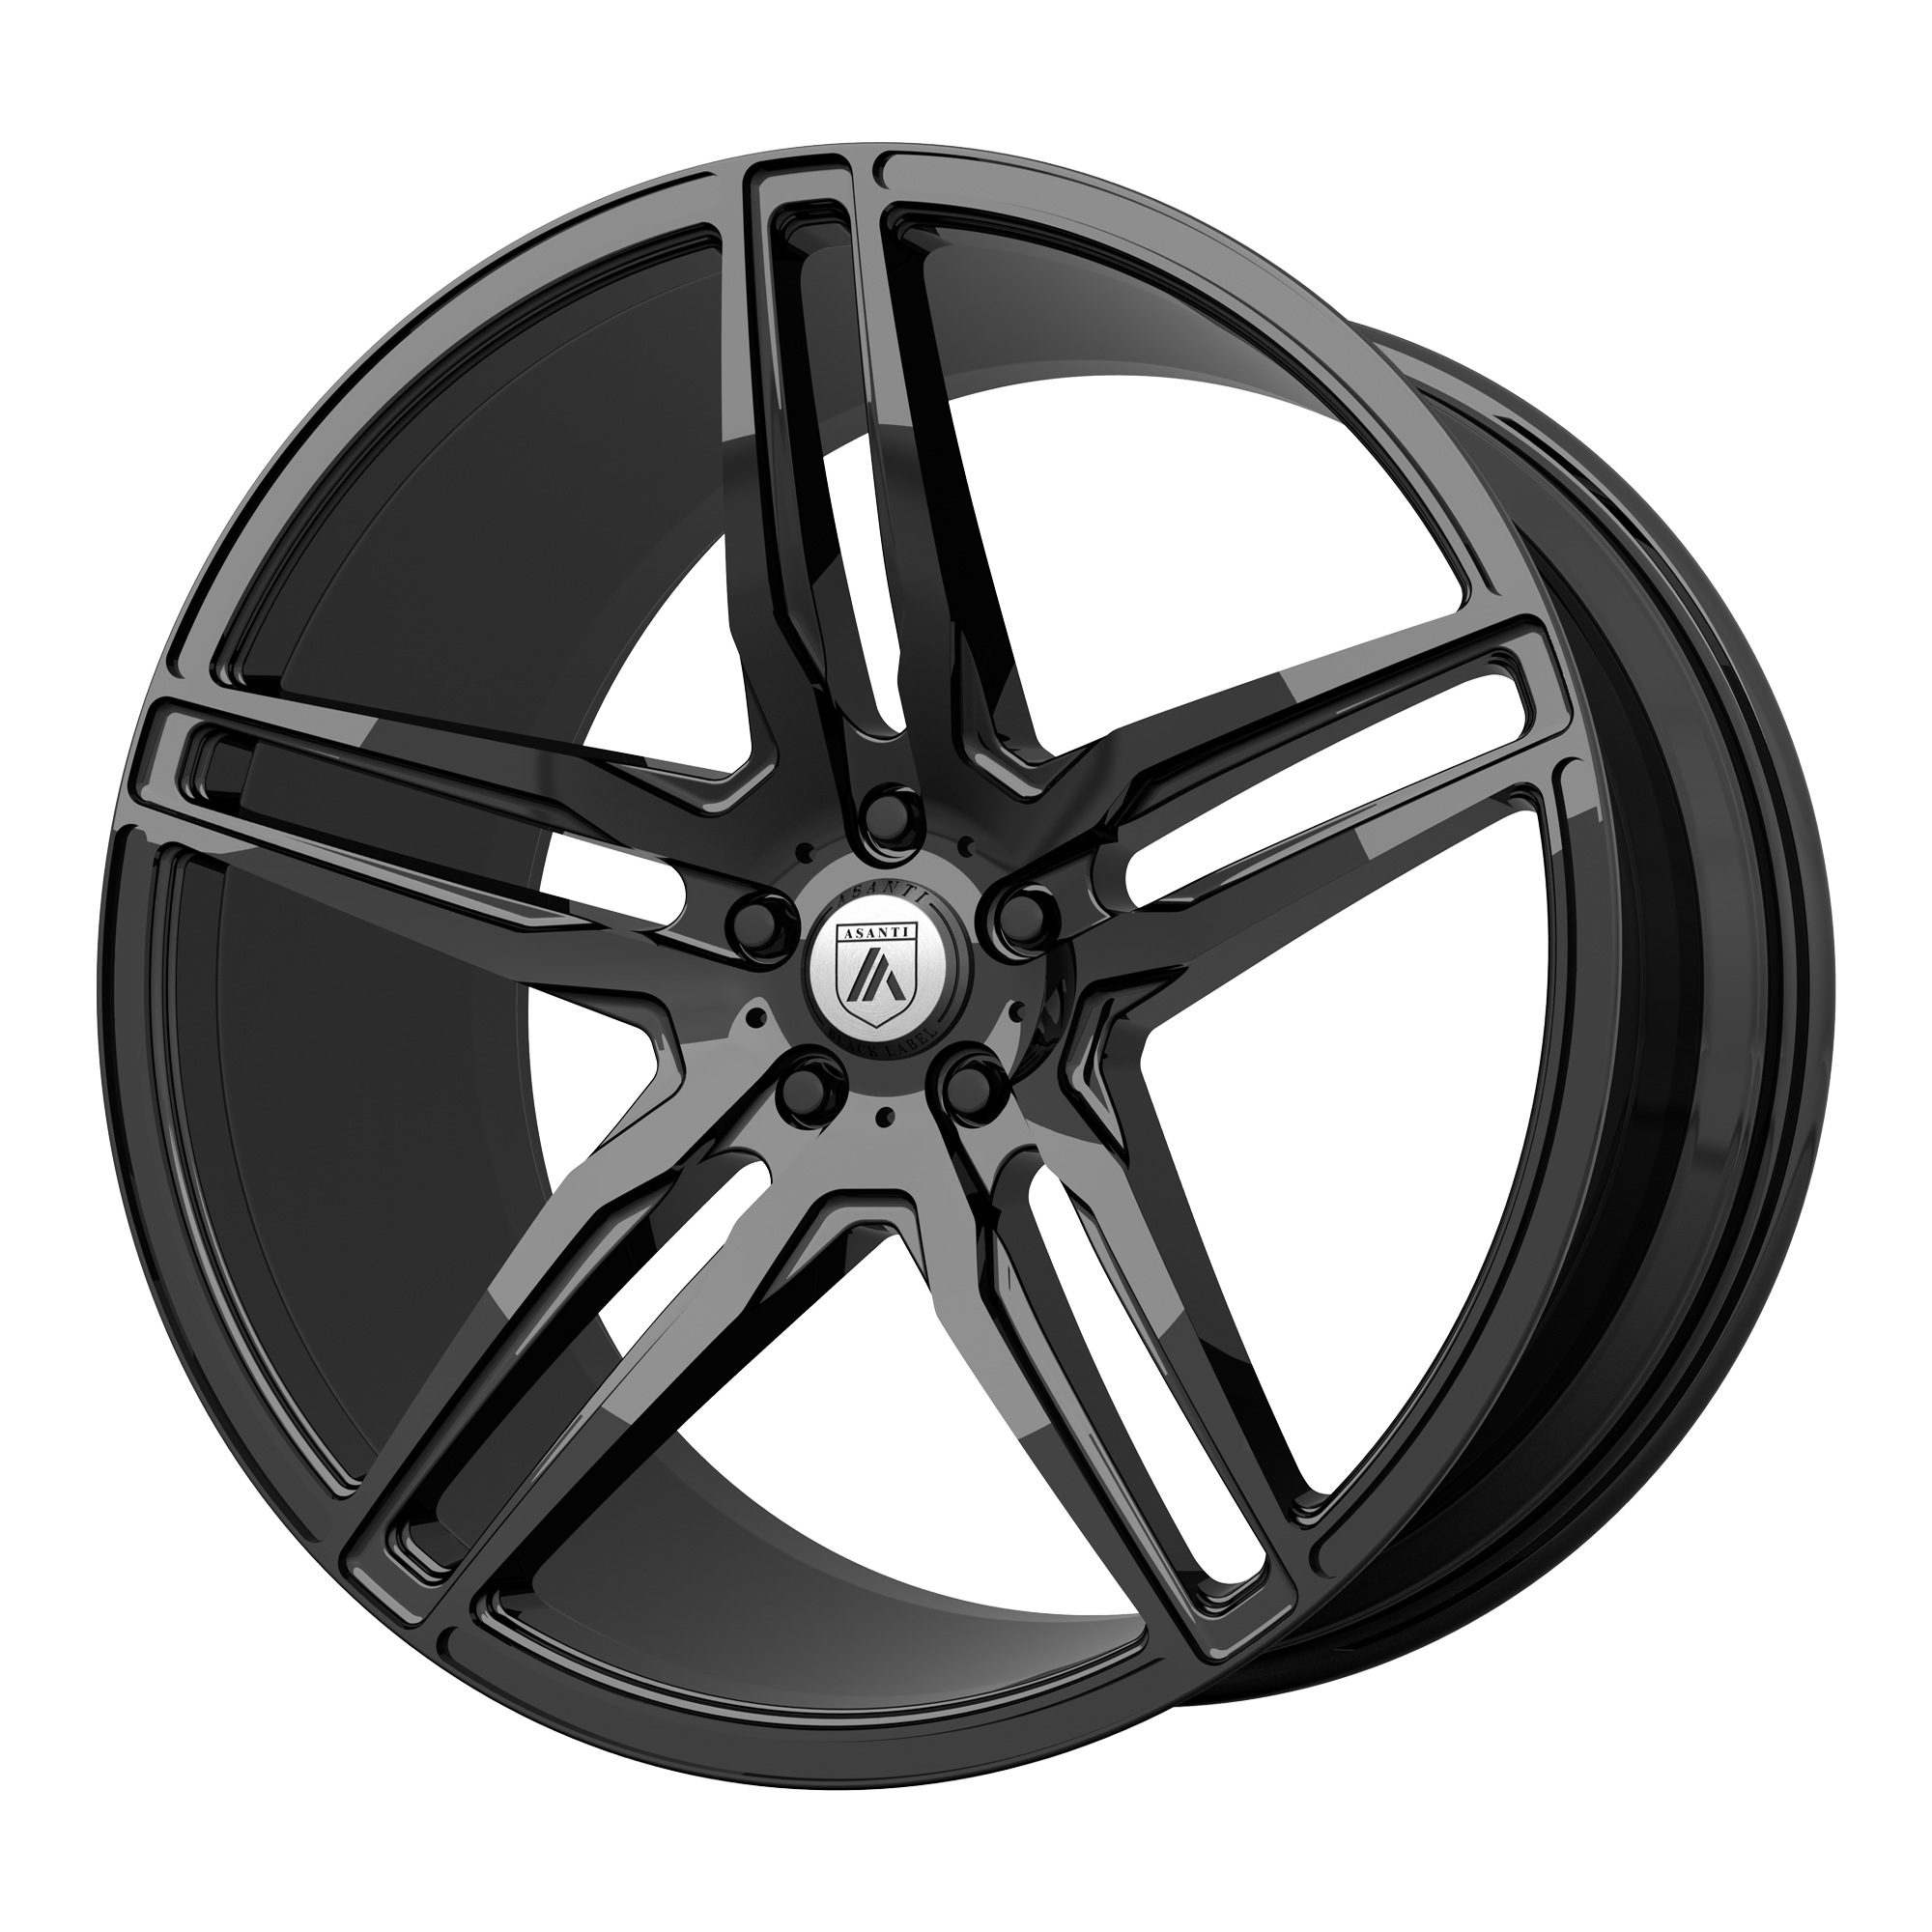 ORION 20x9 5x115.00 GLOSS BLACK (15 mm) - Tires and Engine Performance